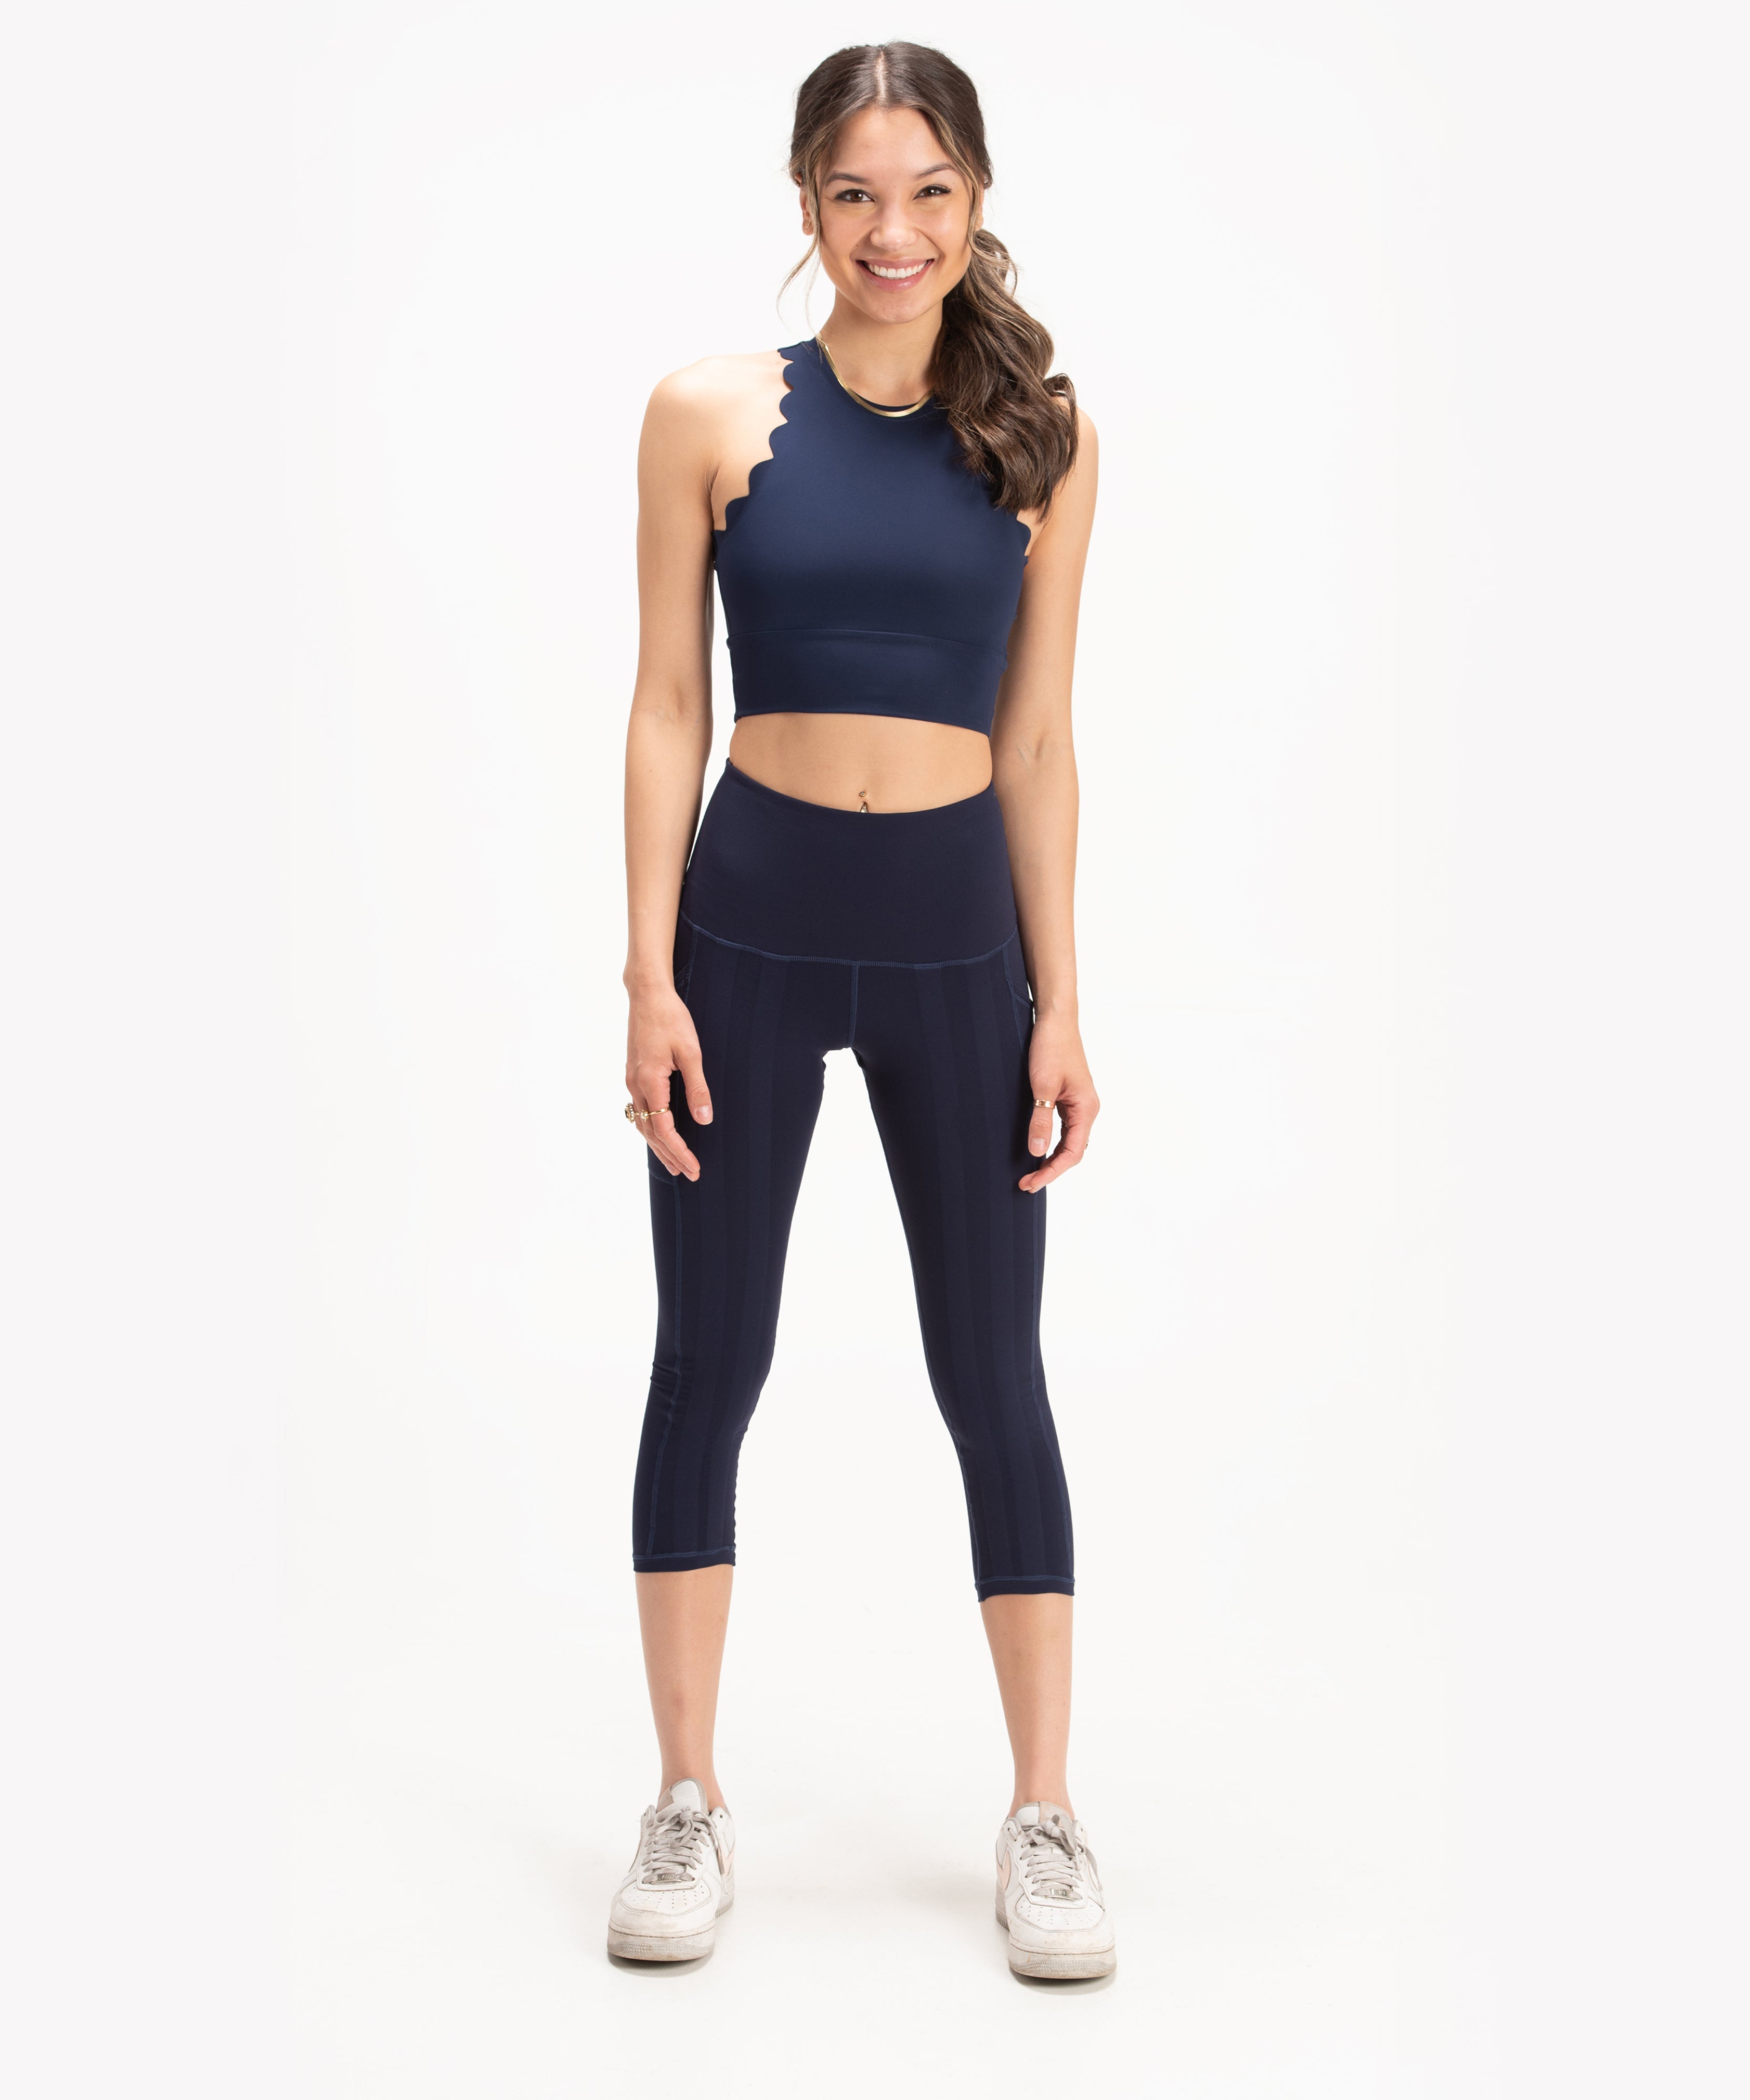 How to wear resistance leggings correctly – Sweetflexx